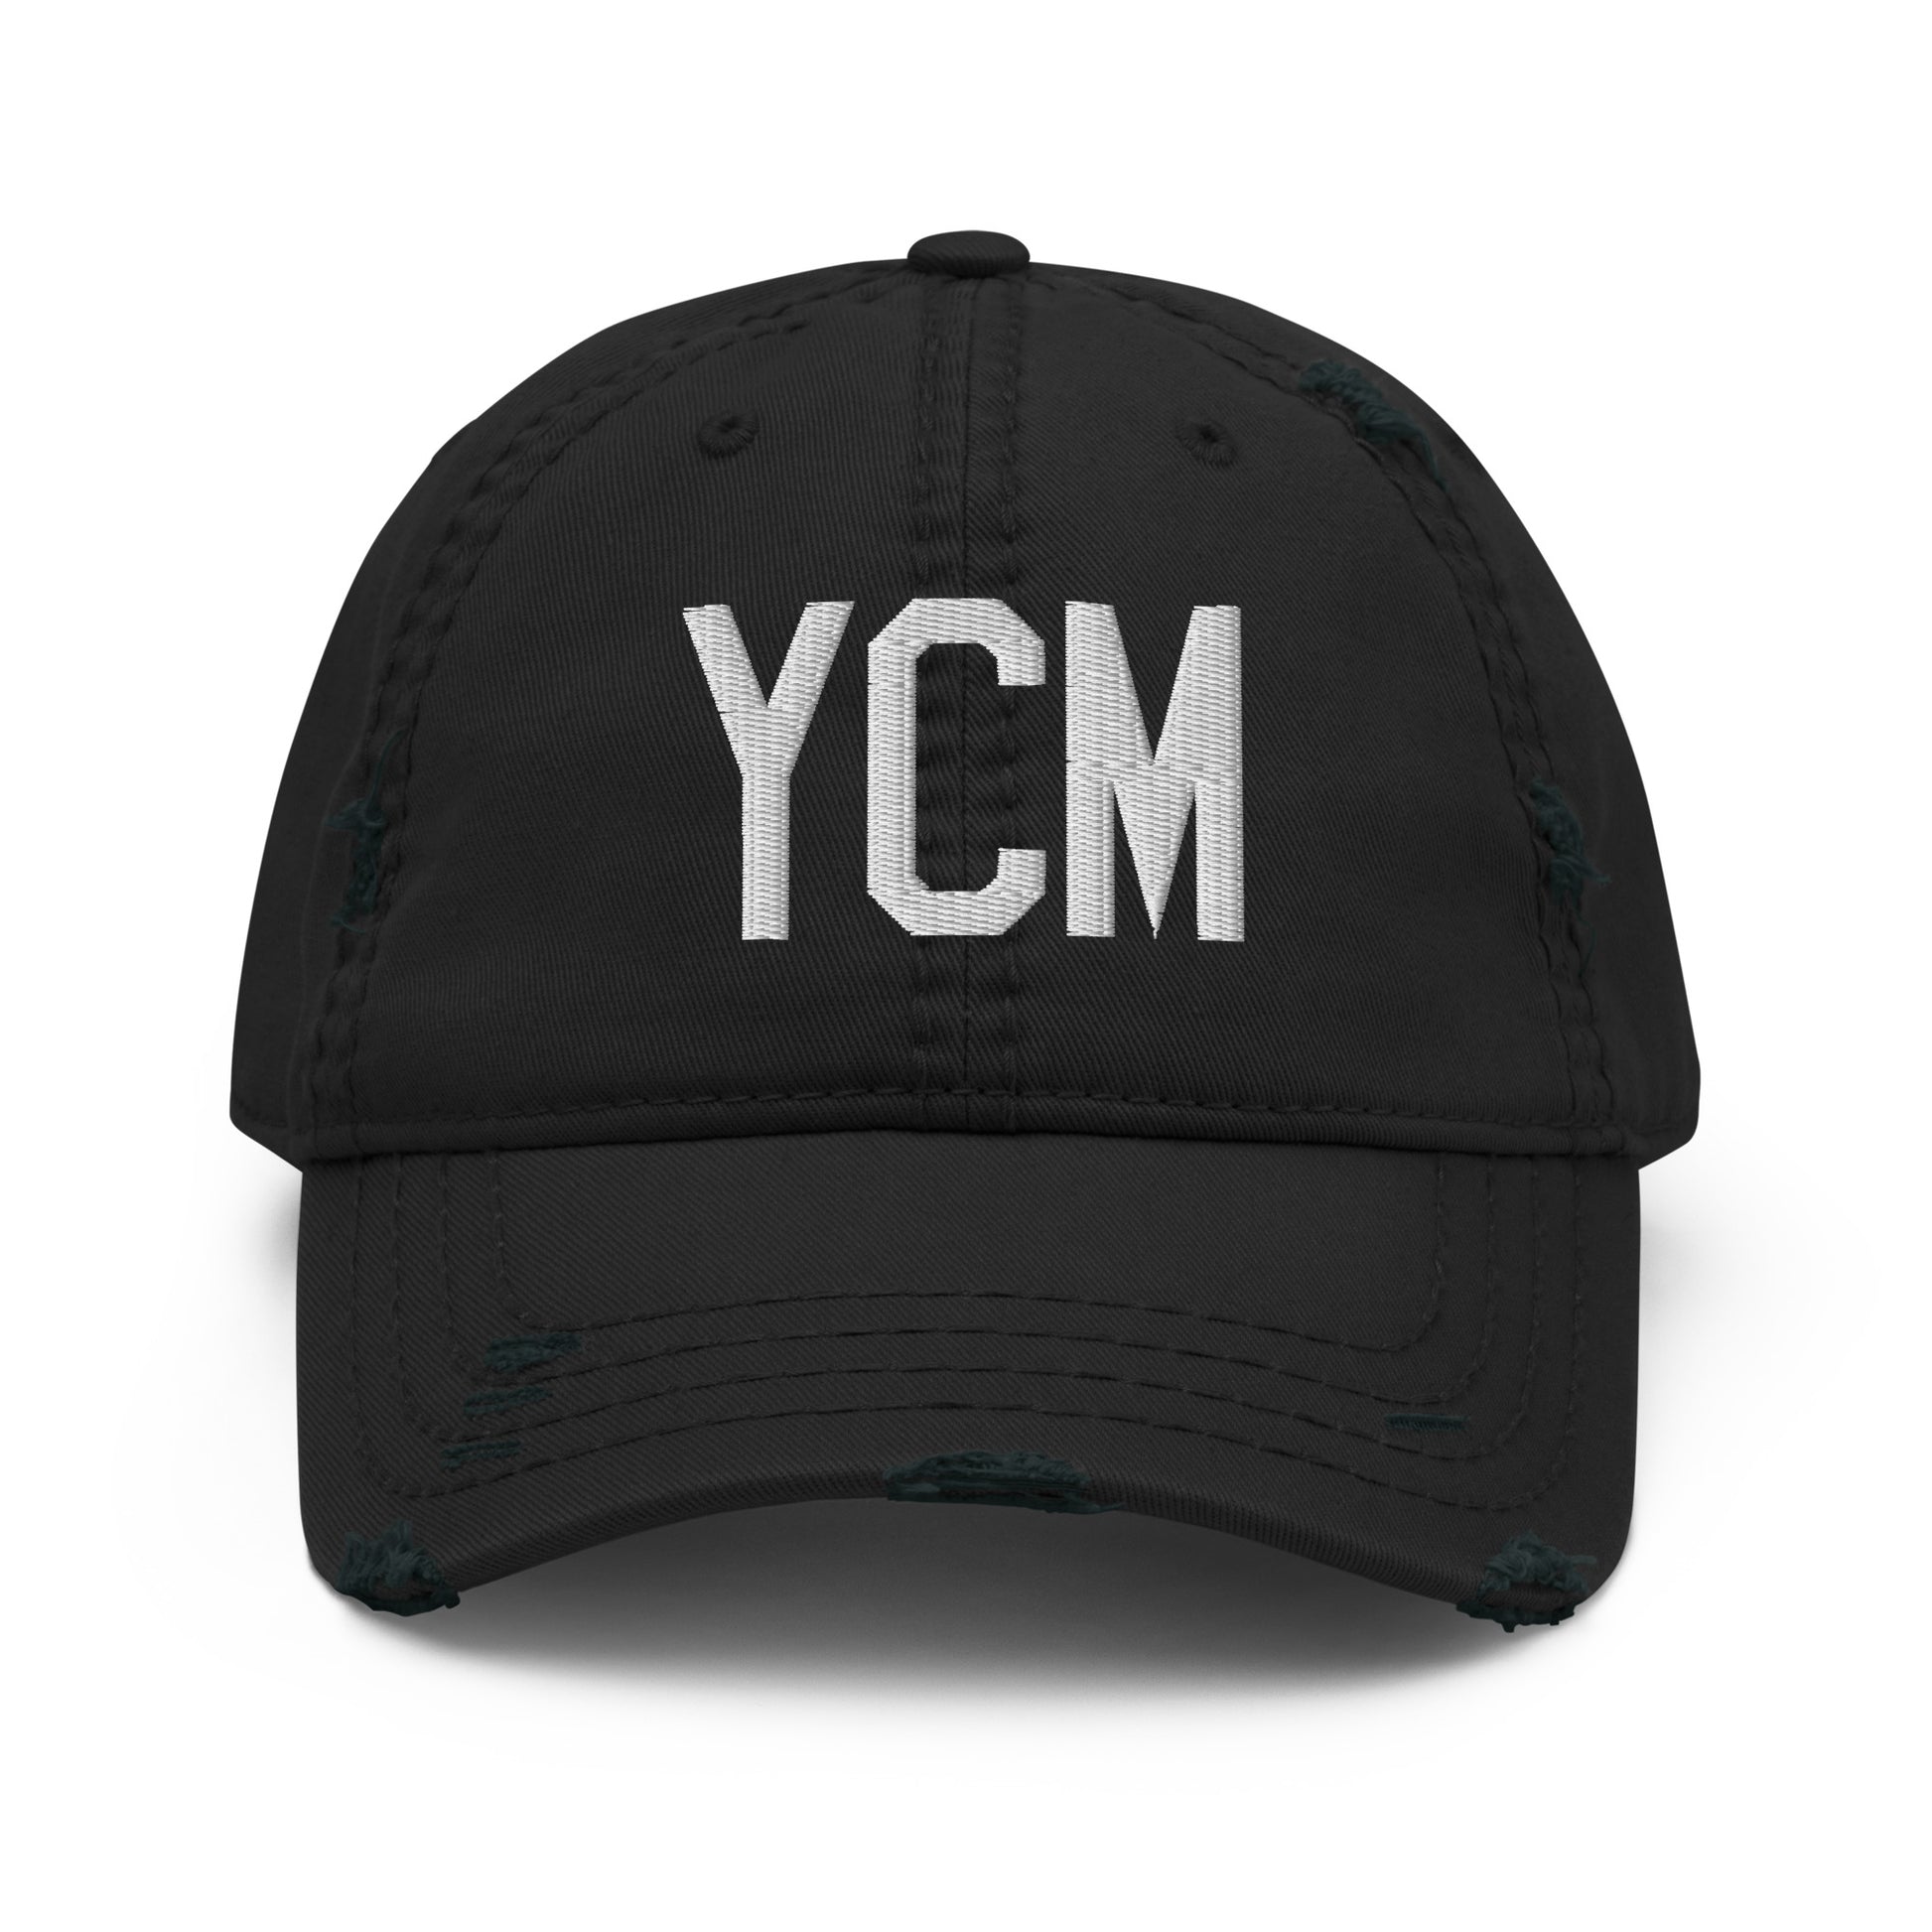 Airport Code Distressed Hat - White • YCM St. Catharines • YHM Designs - Image 10